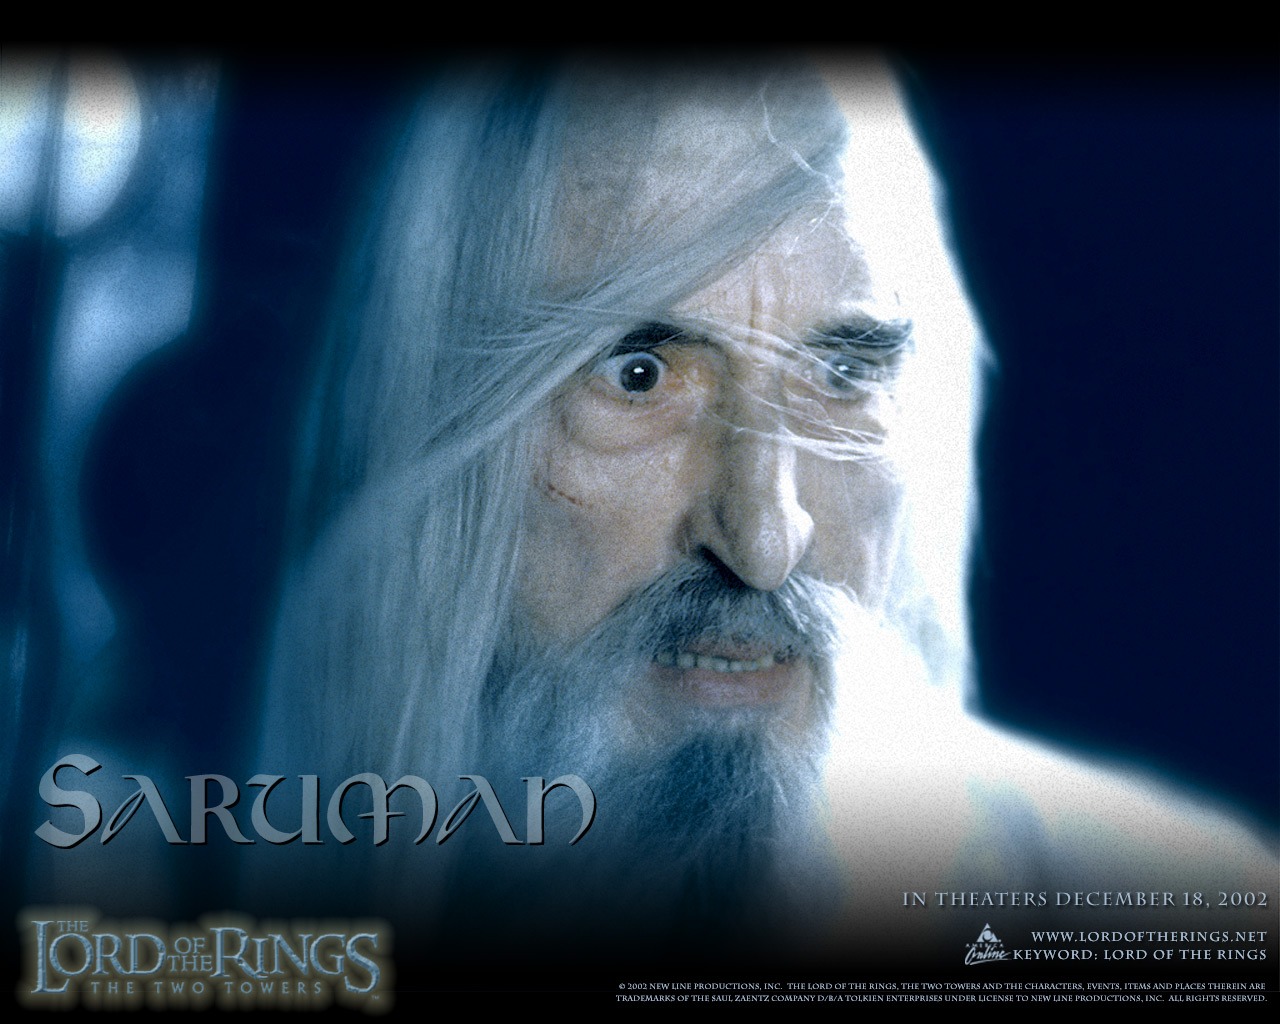 The Lord of the Rings wallpaper #6 - 1280x1024